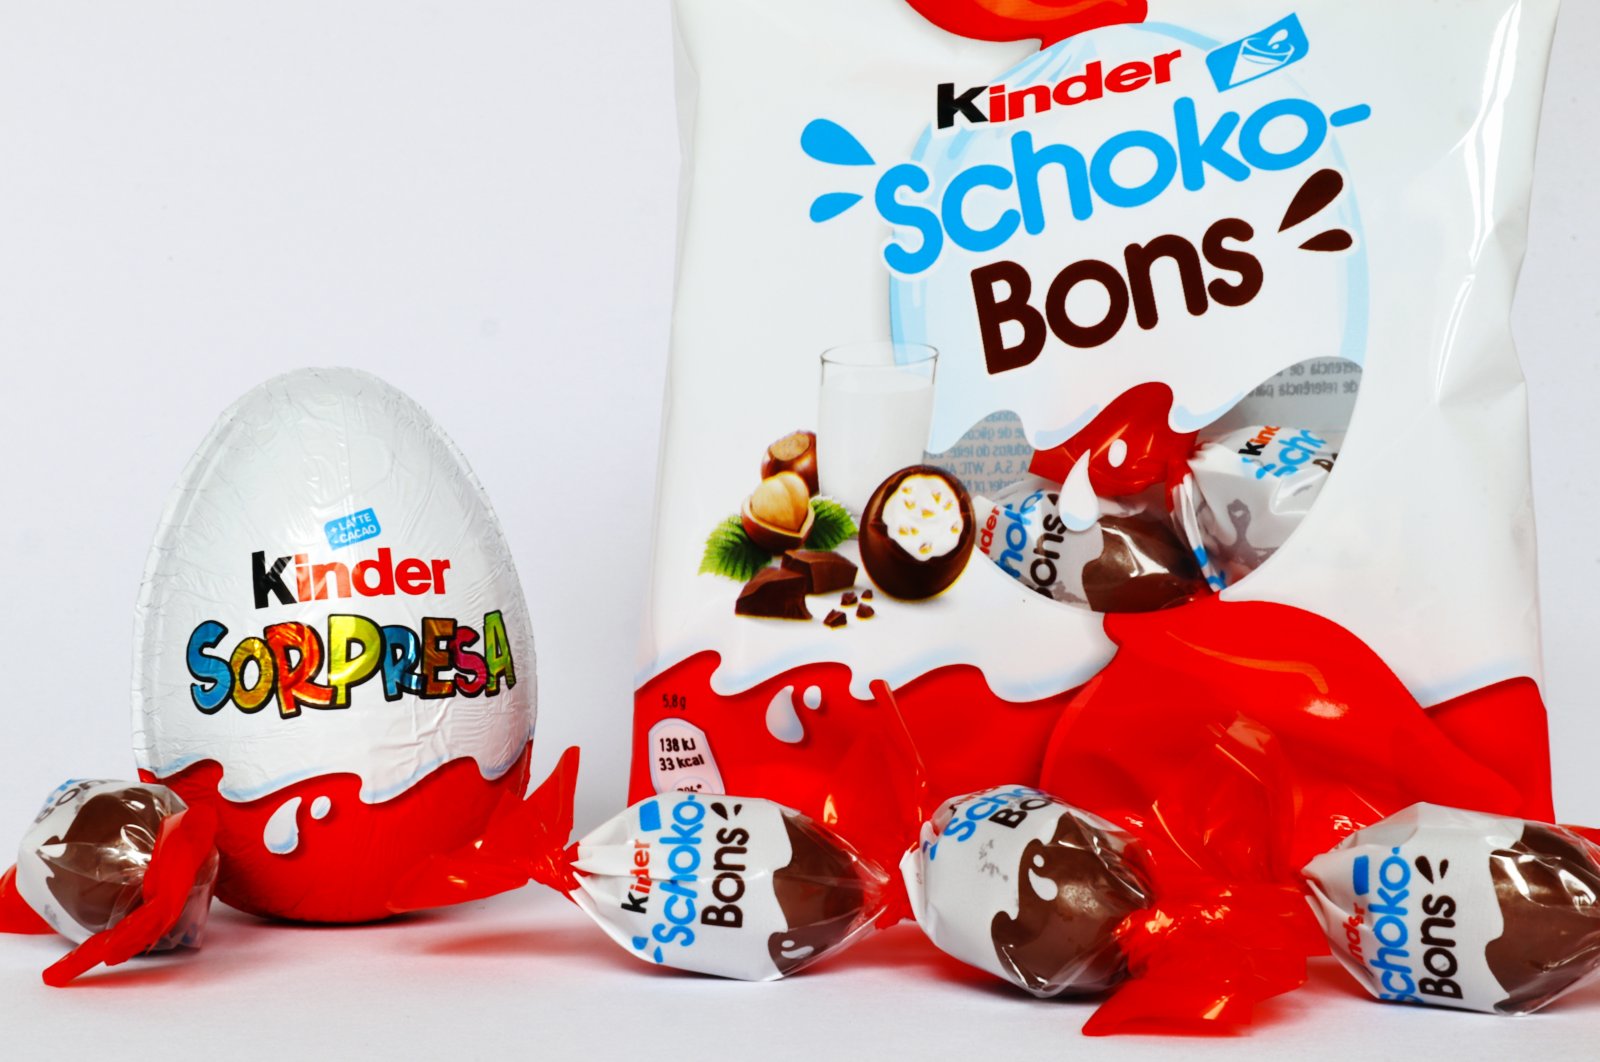 A view of Kinder Surprise chocolate eggs and Schoko-Bons, in Rome, Italy, April 6, 2022. (Shutterstock Photo)